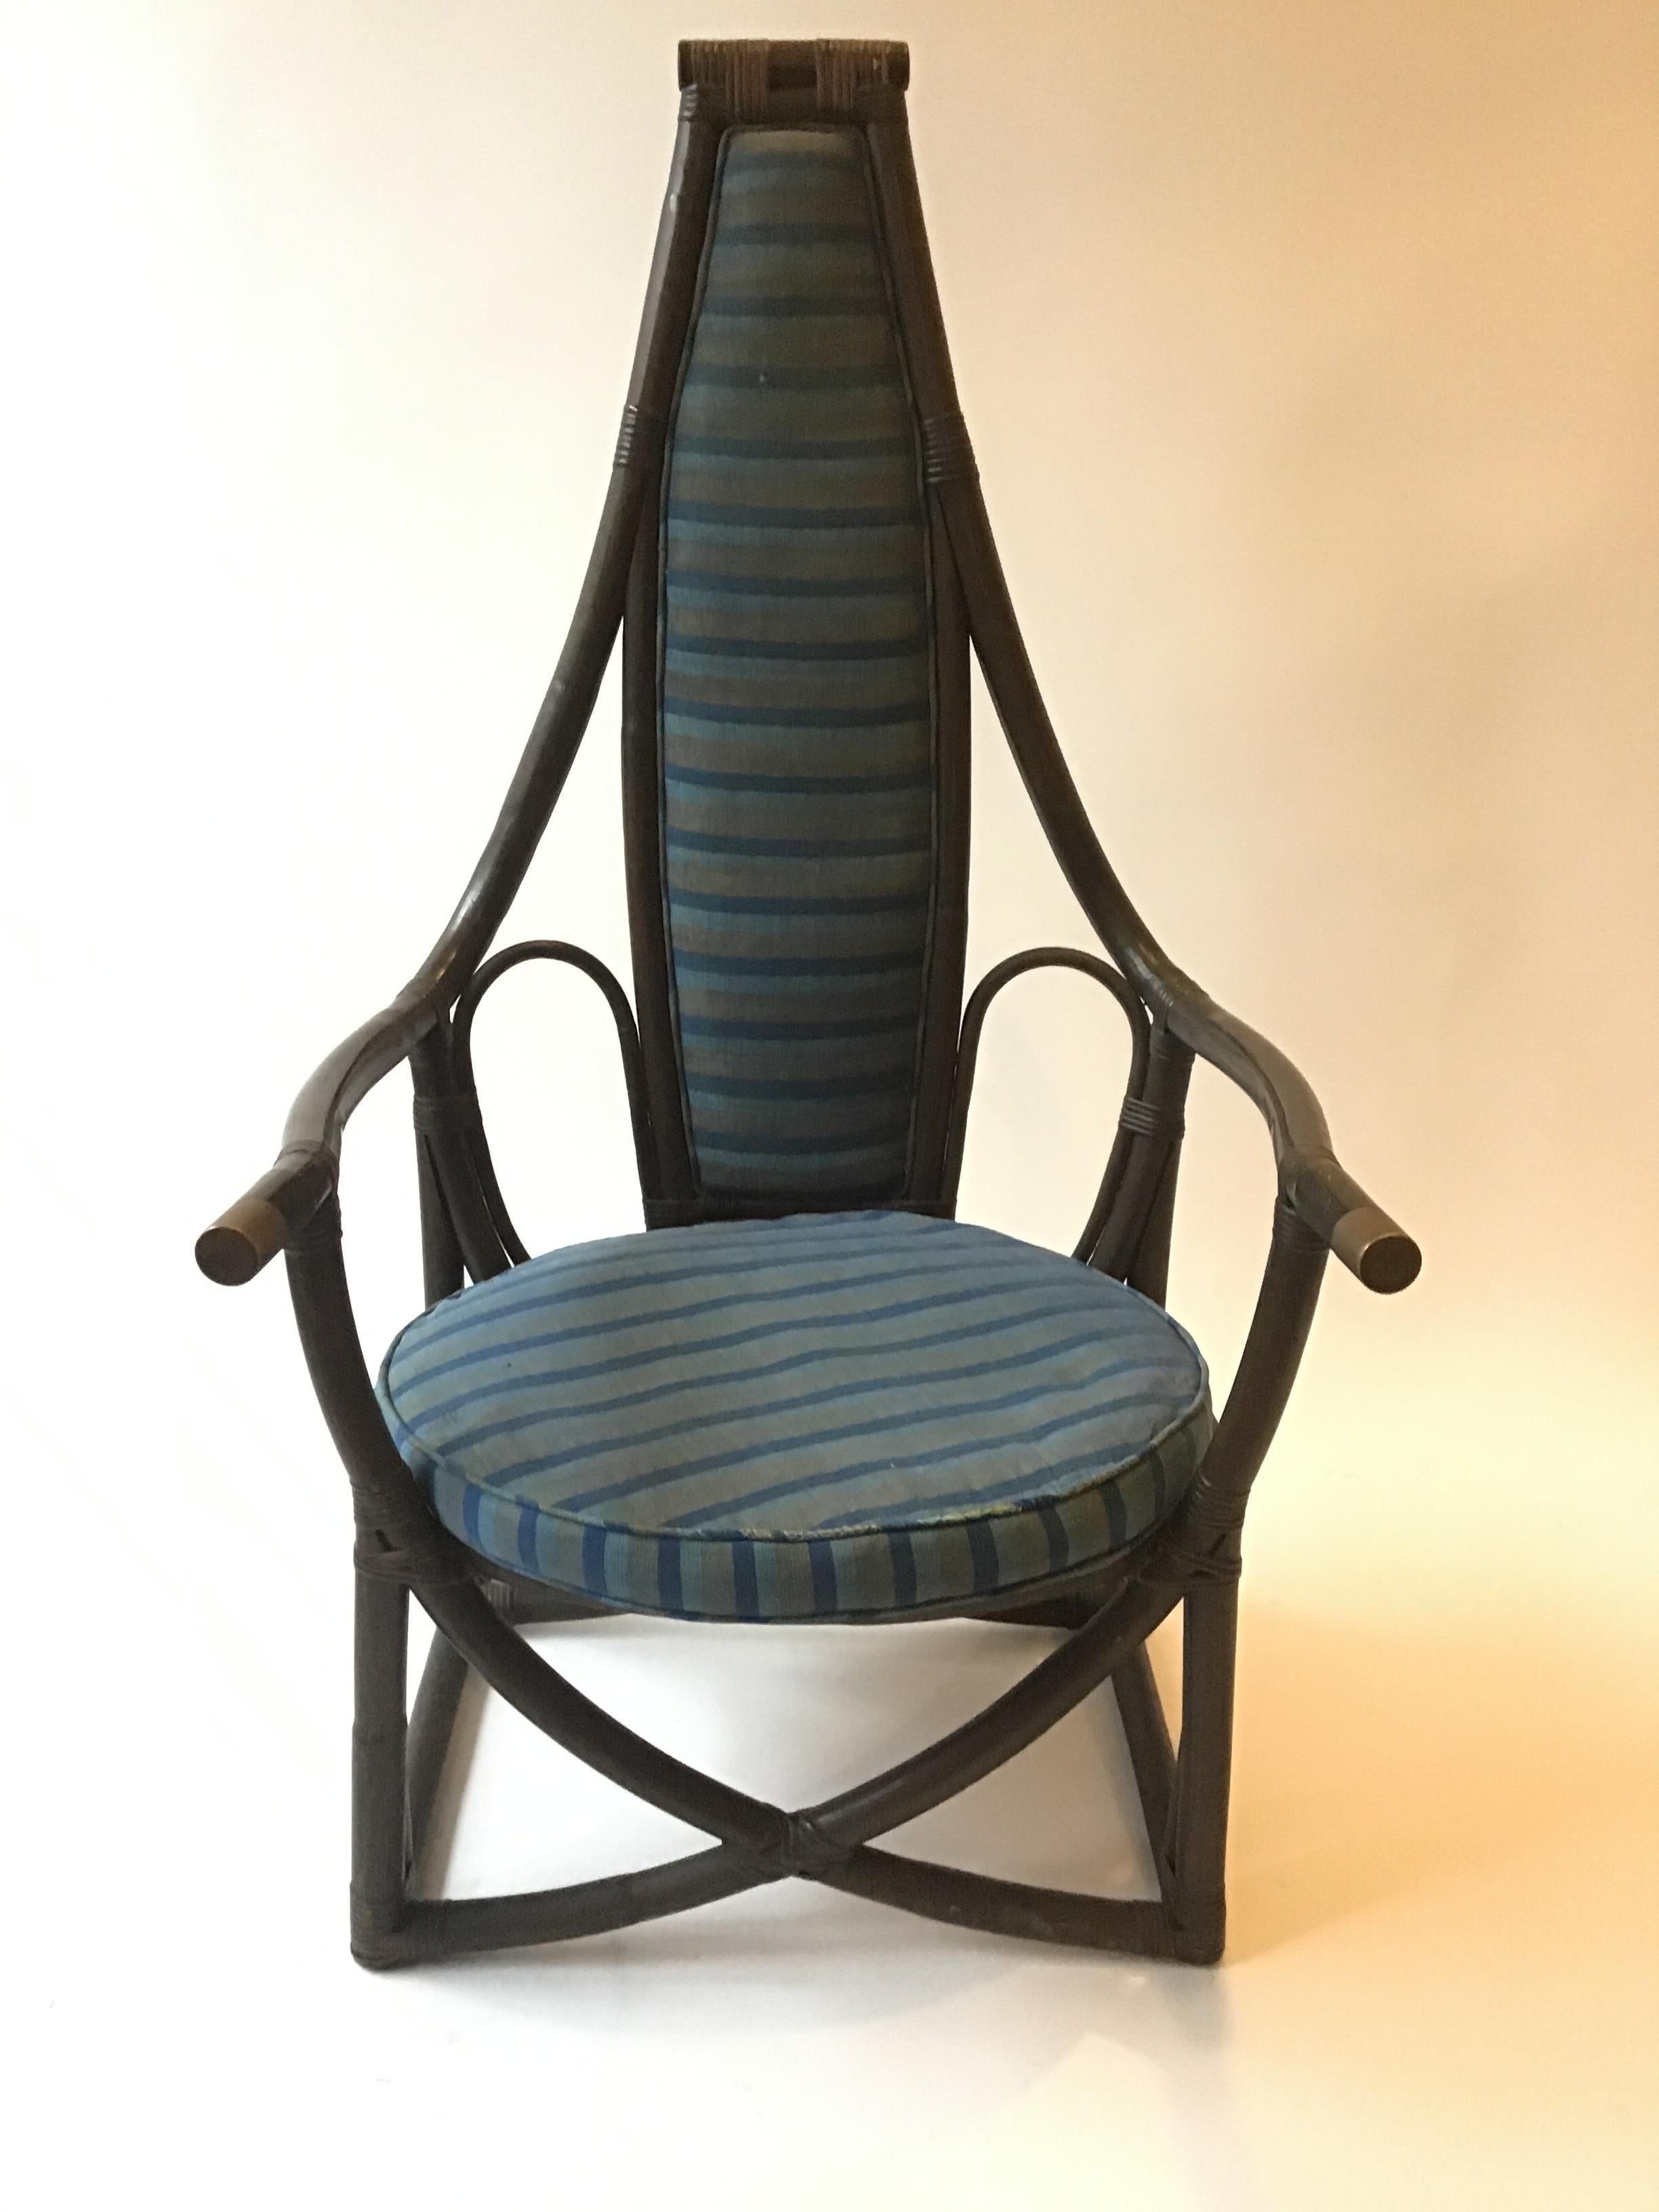 1950s rattan throne chair. Needs reupholstering.